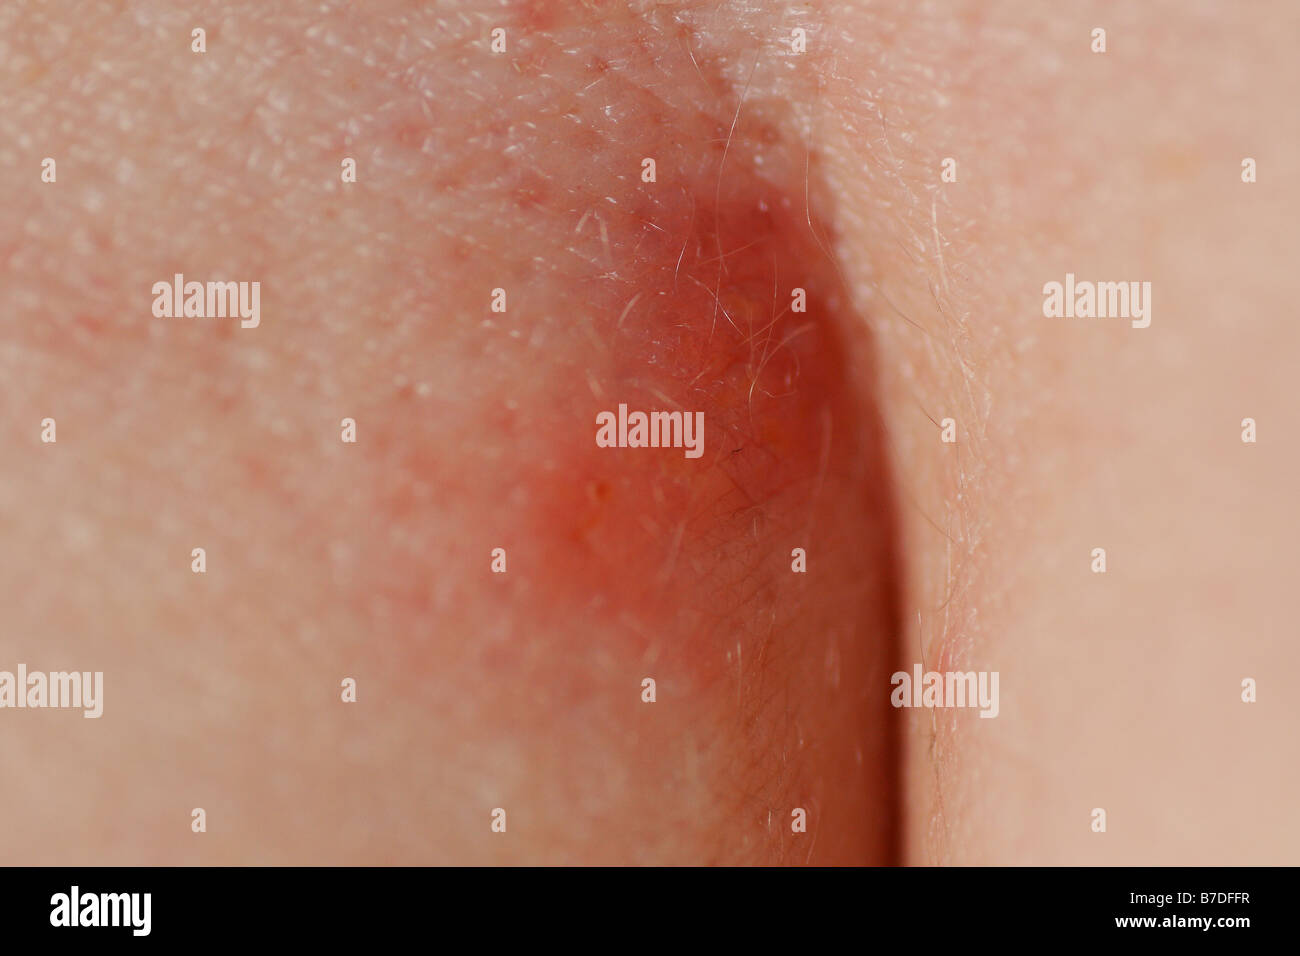 herpes zoster on a woman's behind Stock Photo